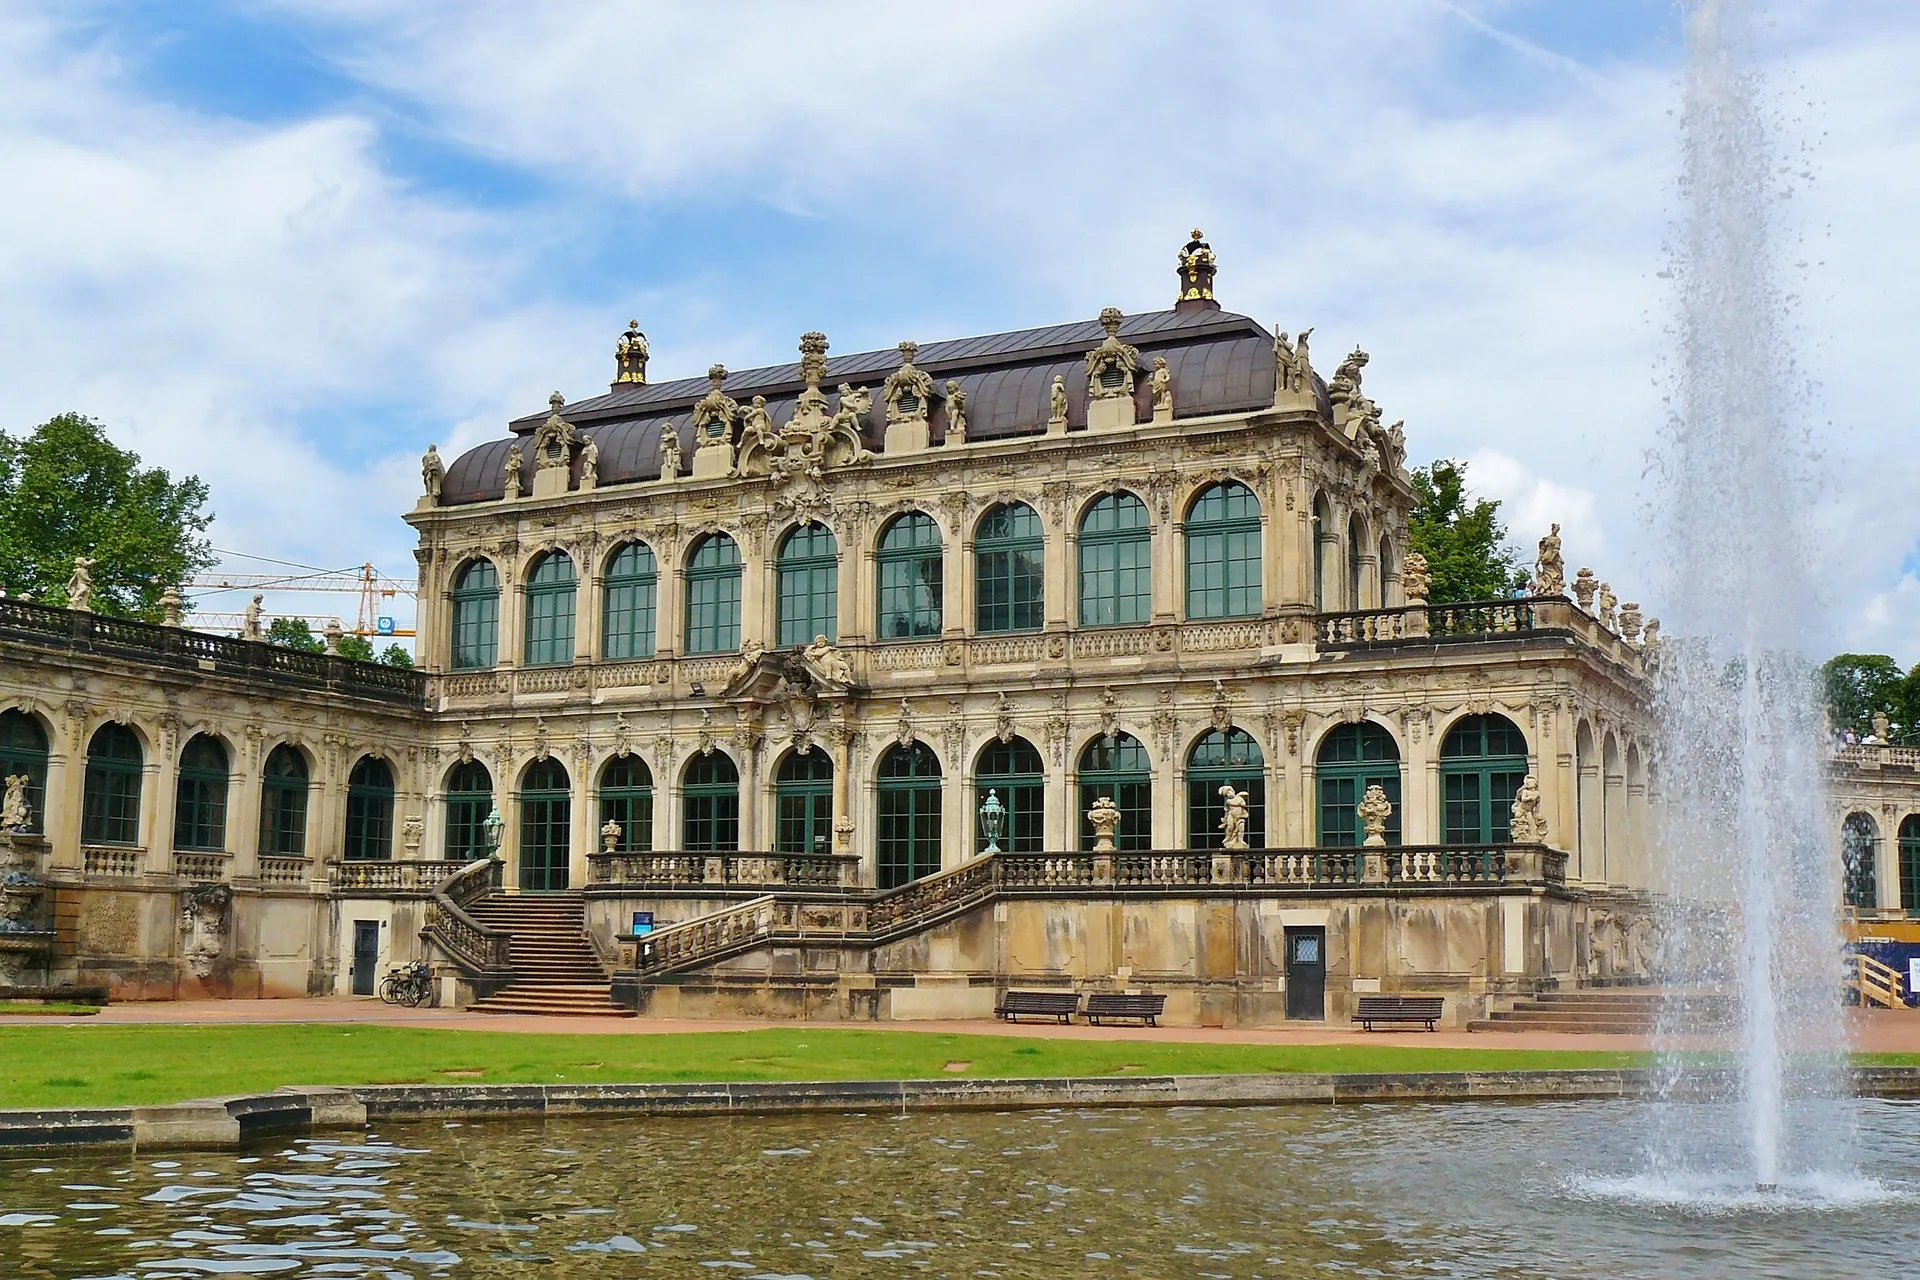 The “Zwinger”, palatial complex with gardens in Dresden’s historical center.